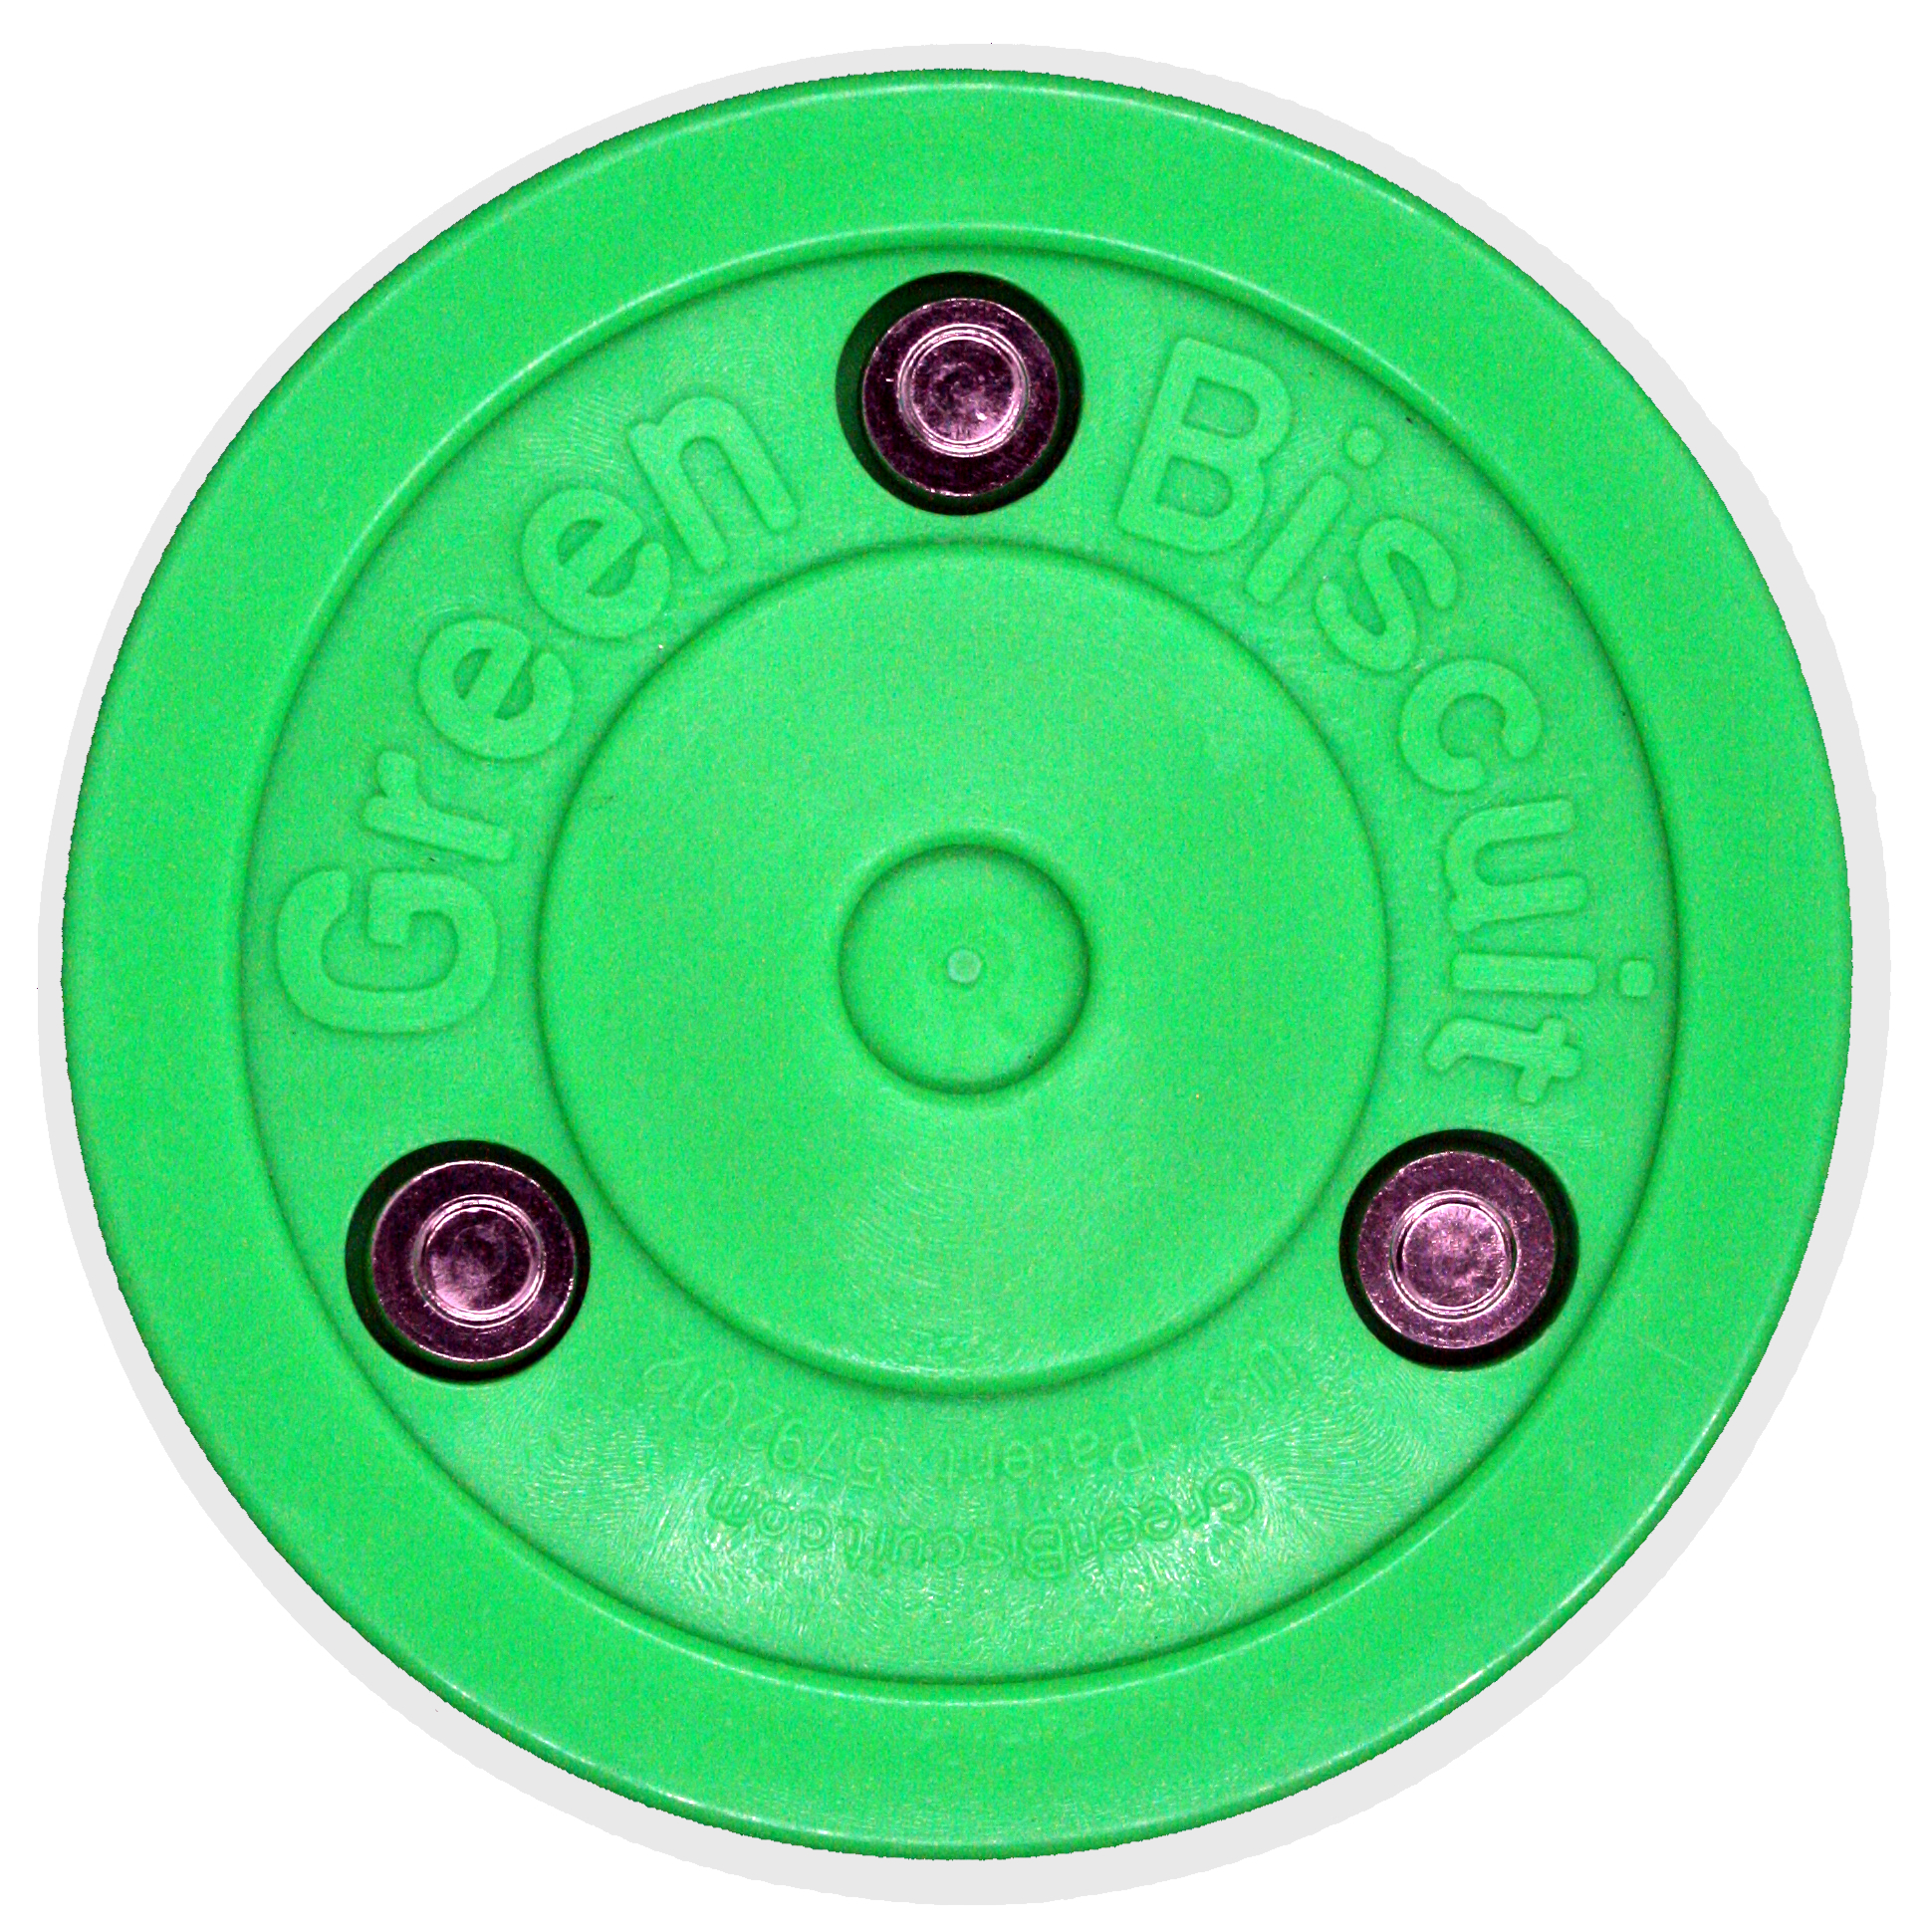 GREEN BISCUIT Colorado Avalanche Off Ice Training Hockey Puck,Roller Hockey Puck 